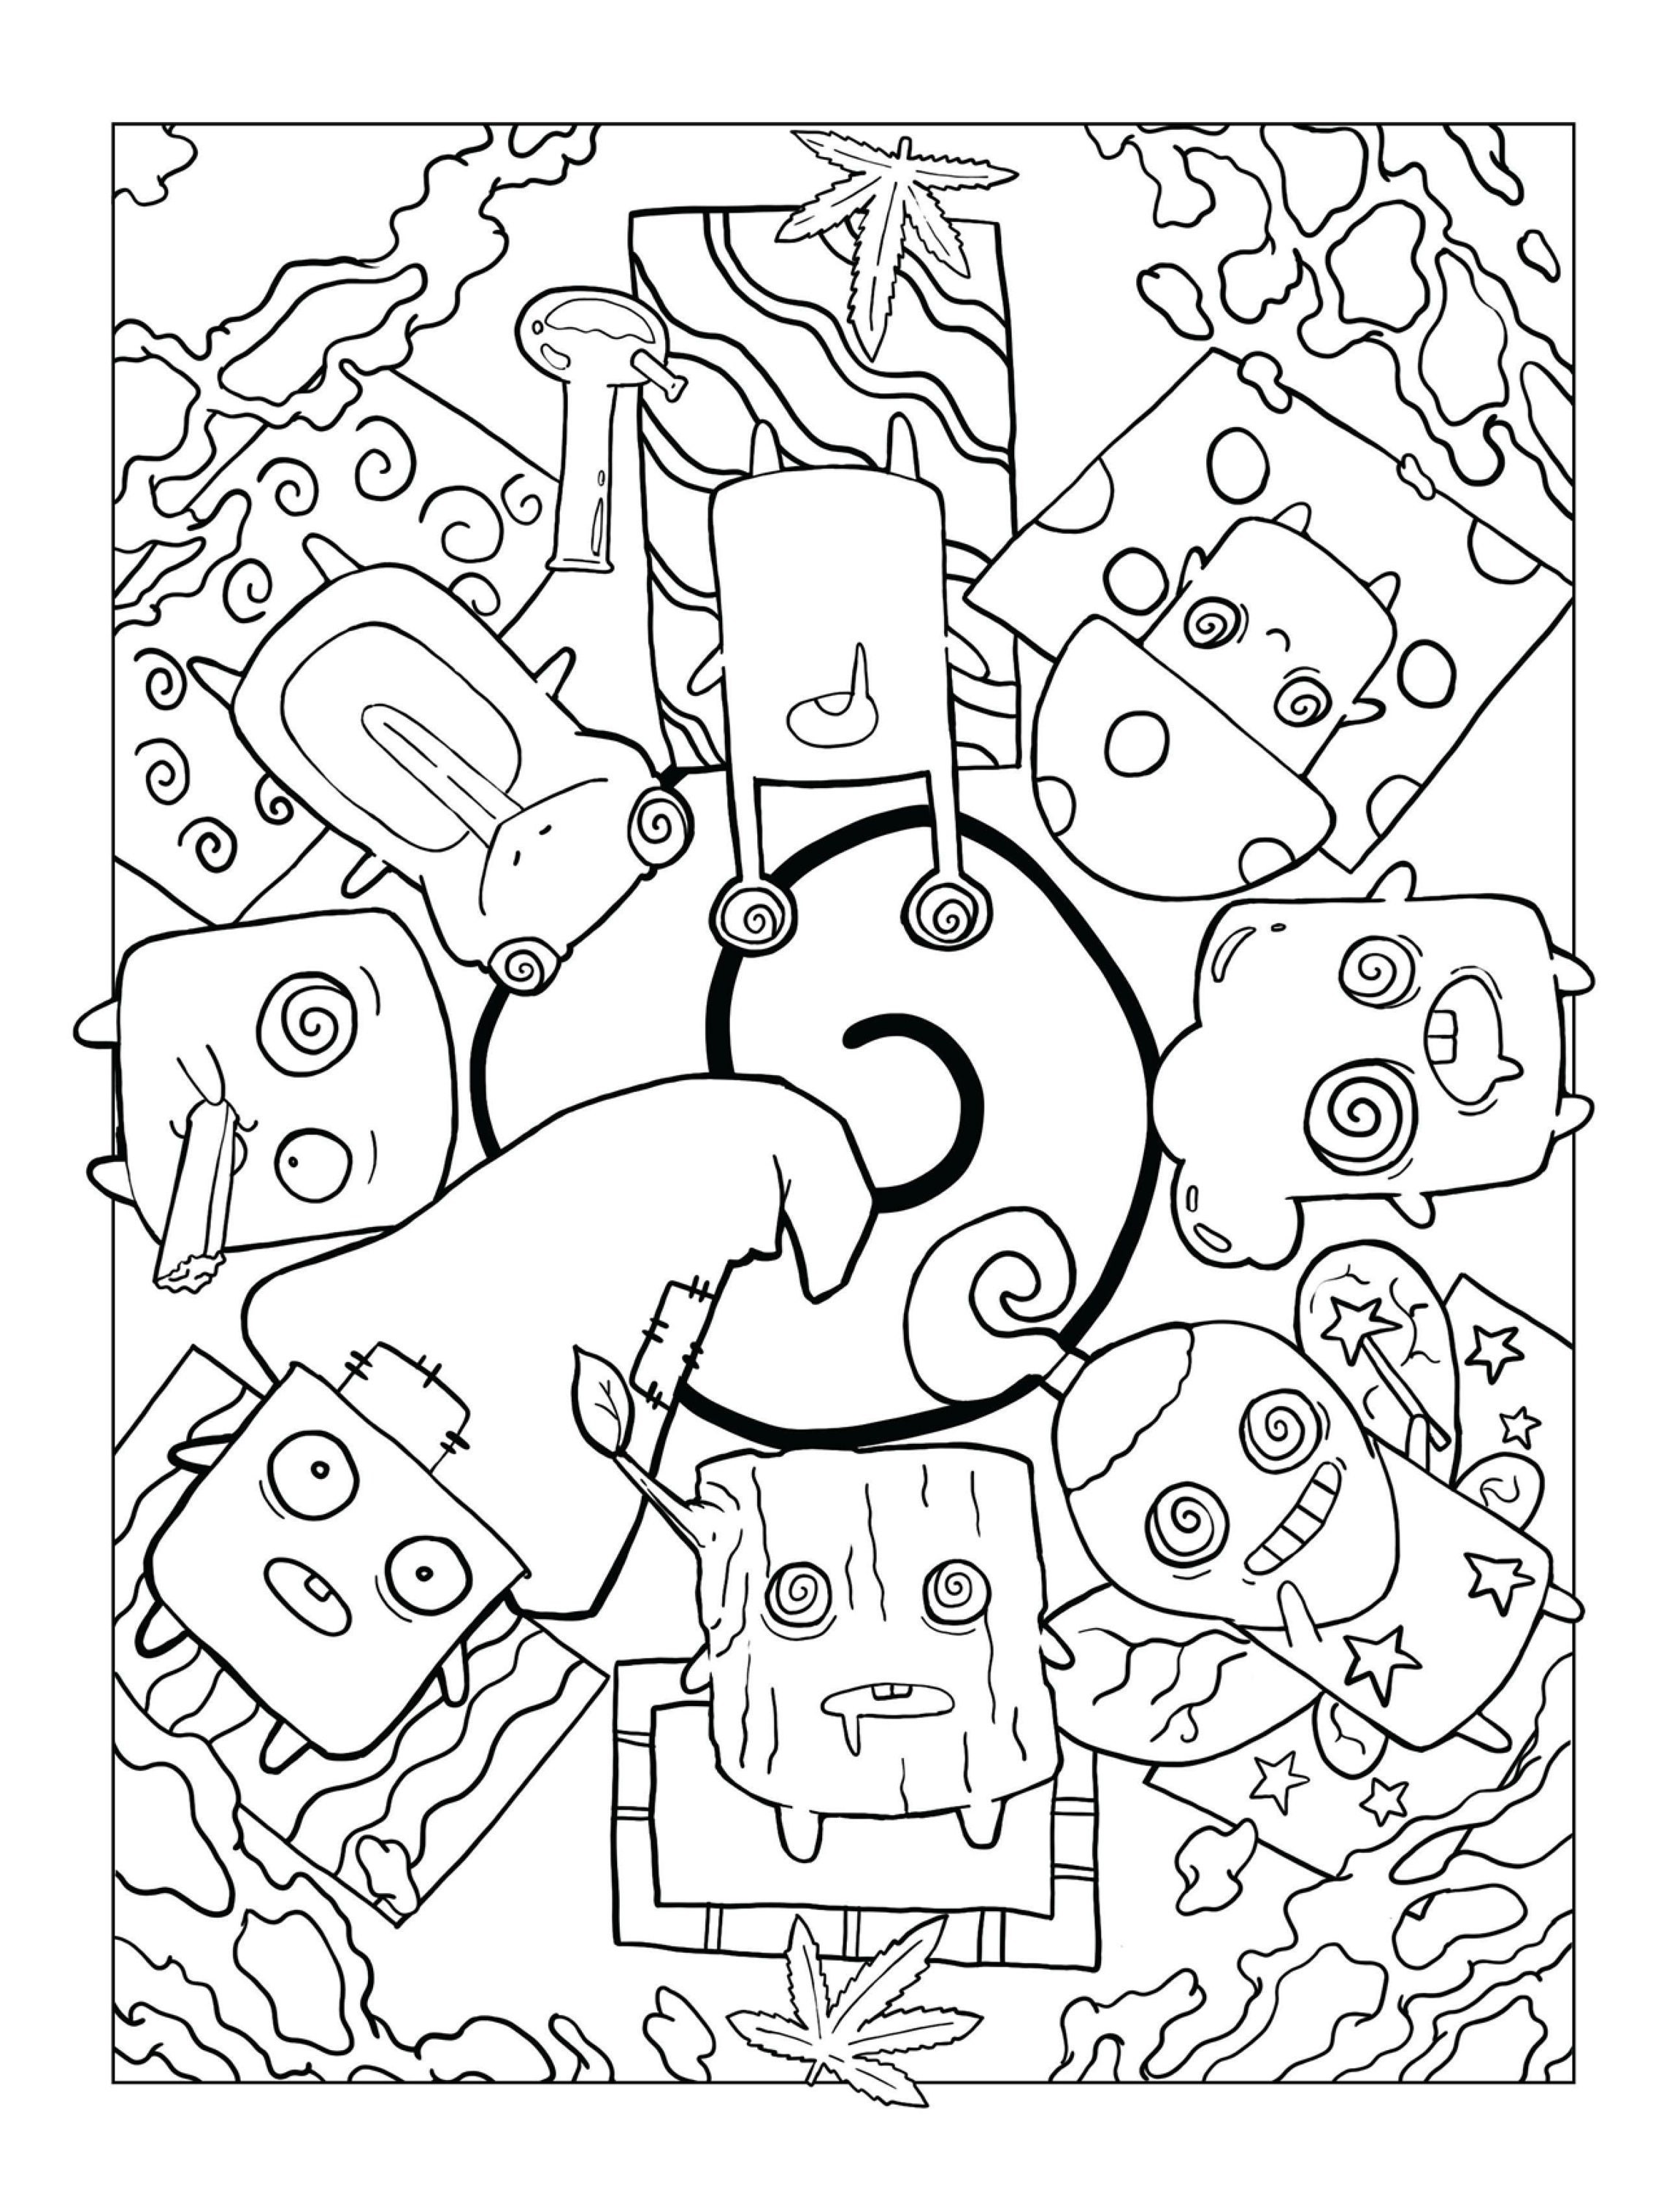 Stoner coloring book for adults - Payhip